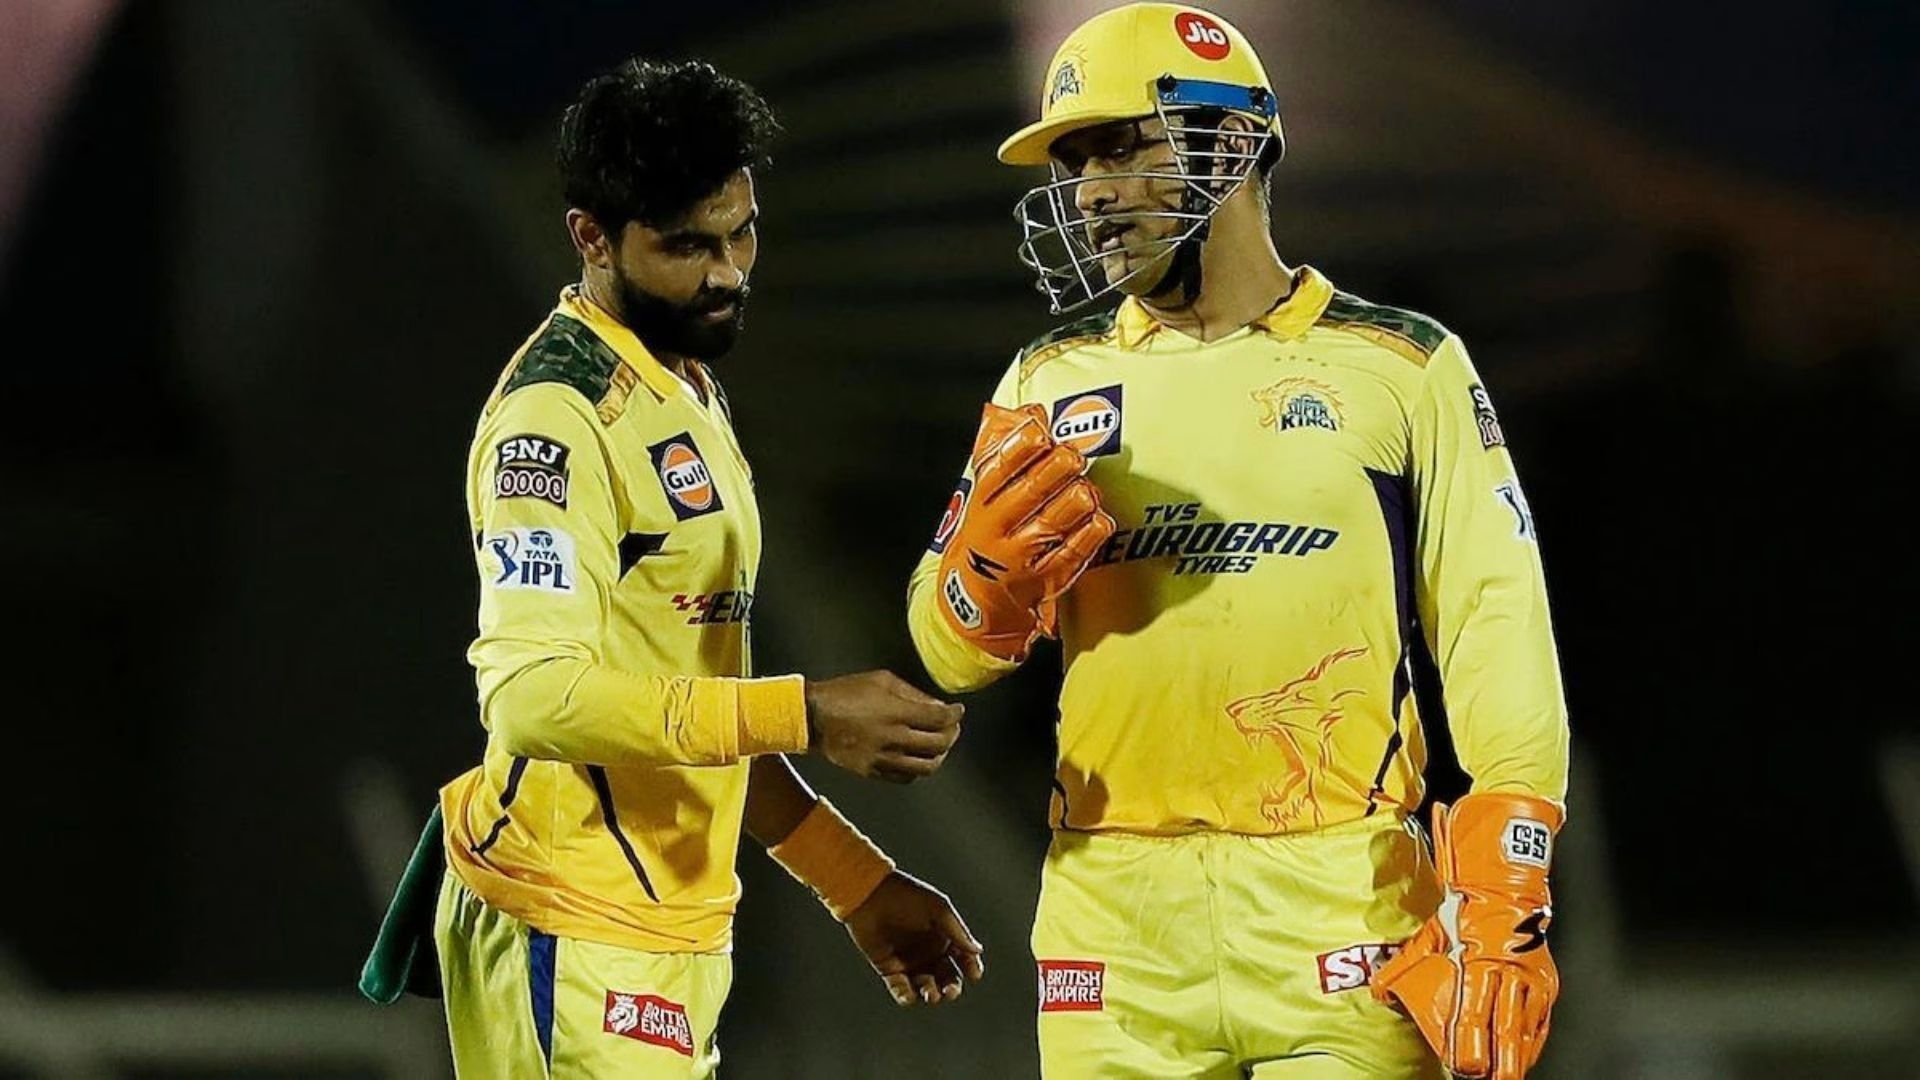 MS Dhoni replaced Ravindra Jadeja as the CSK skipper in the middle of IPL 2022. [P/C: iplt20.com]